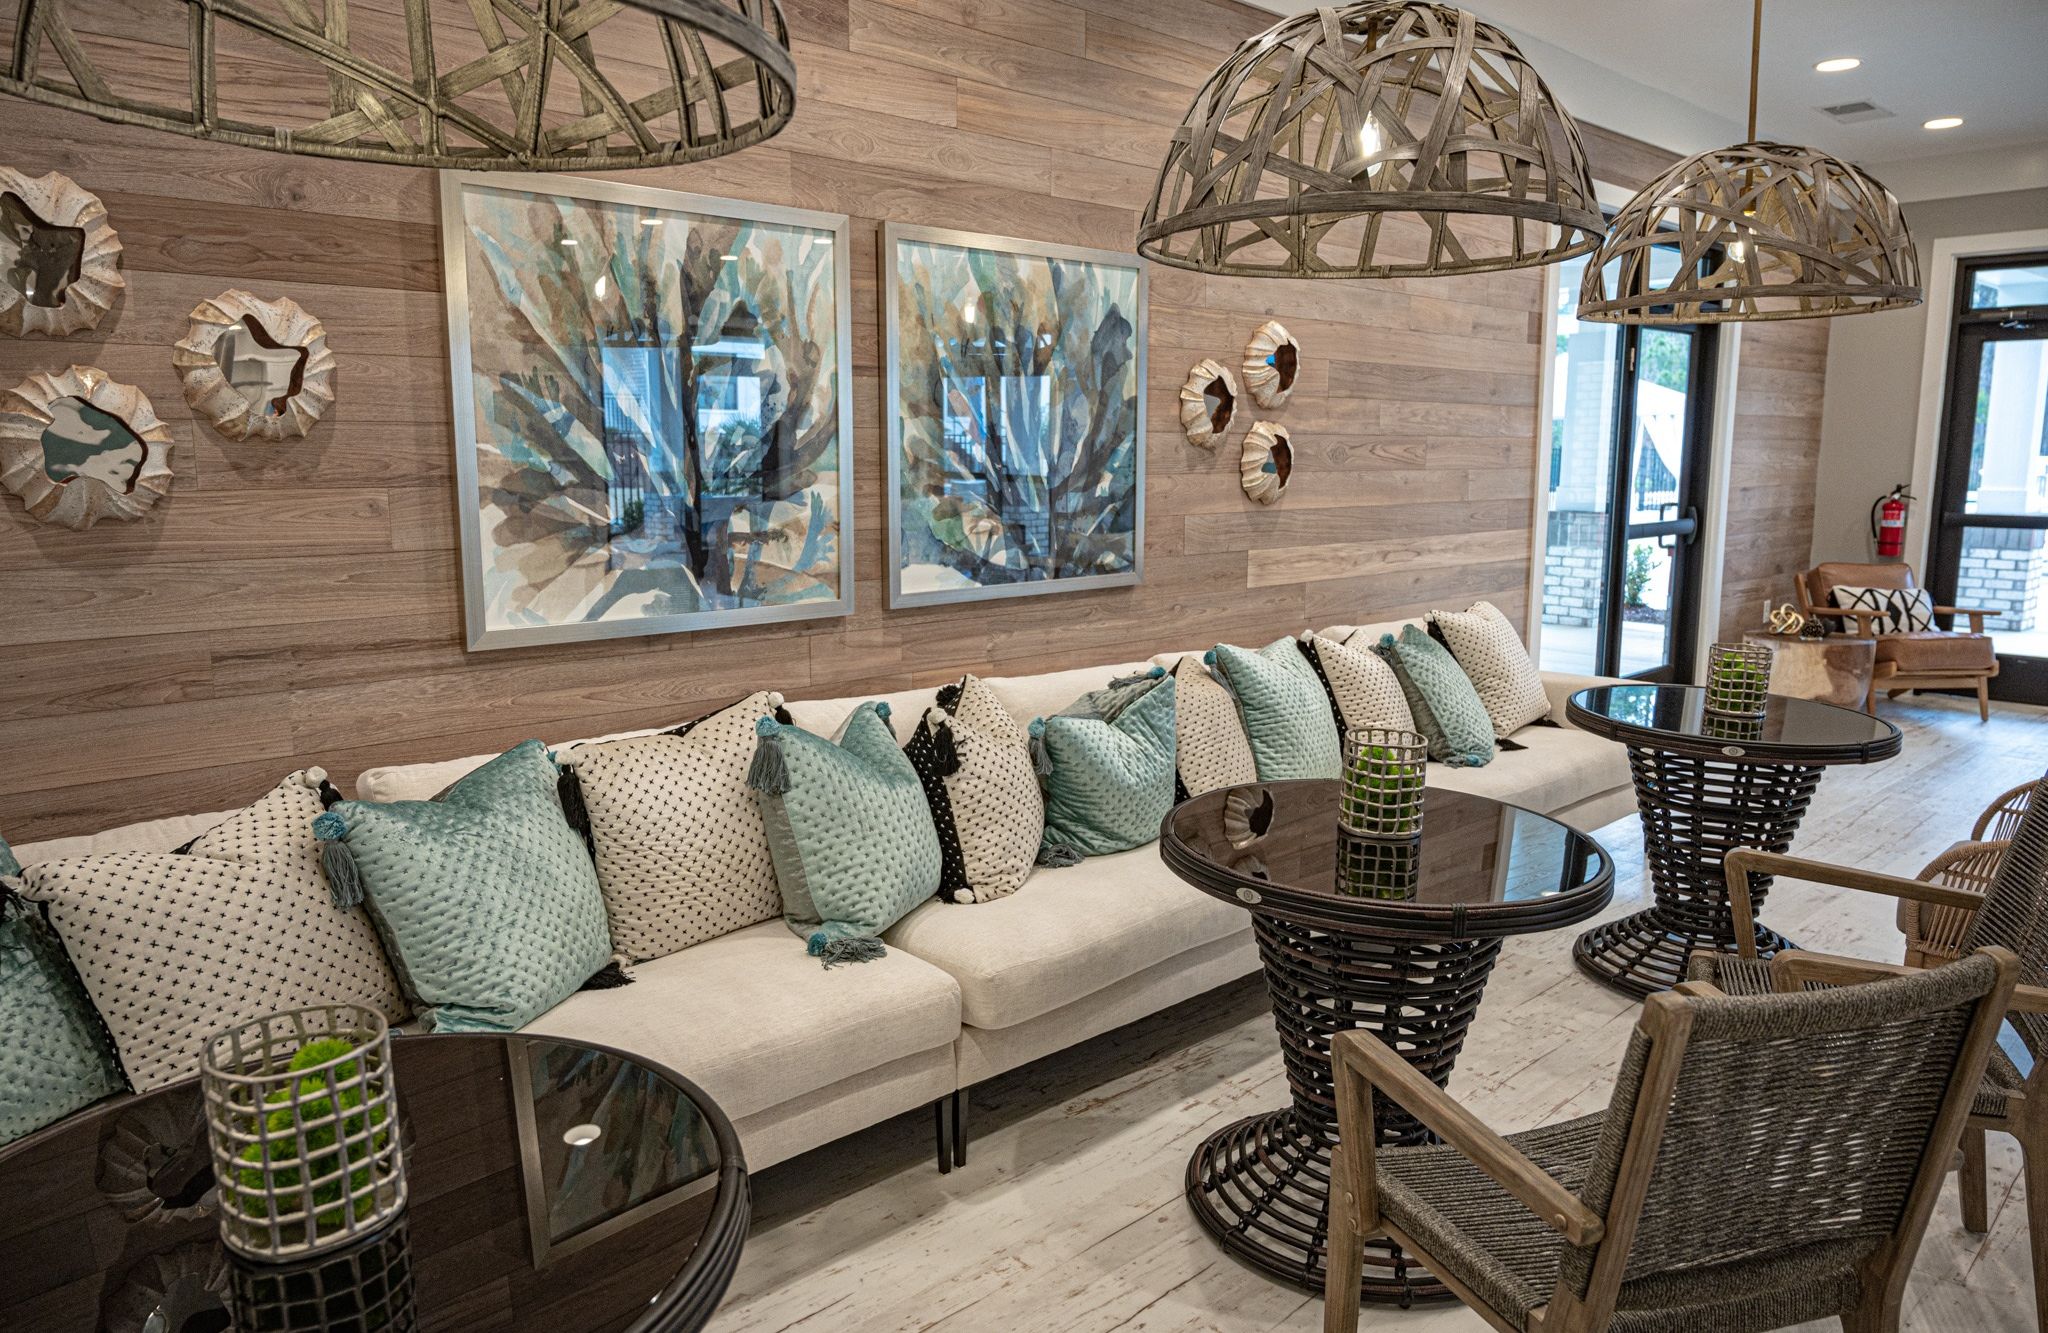 Hawthorne at Smith Creek resident clubhouse amenity with seating area and beautiful finishes